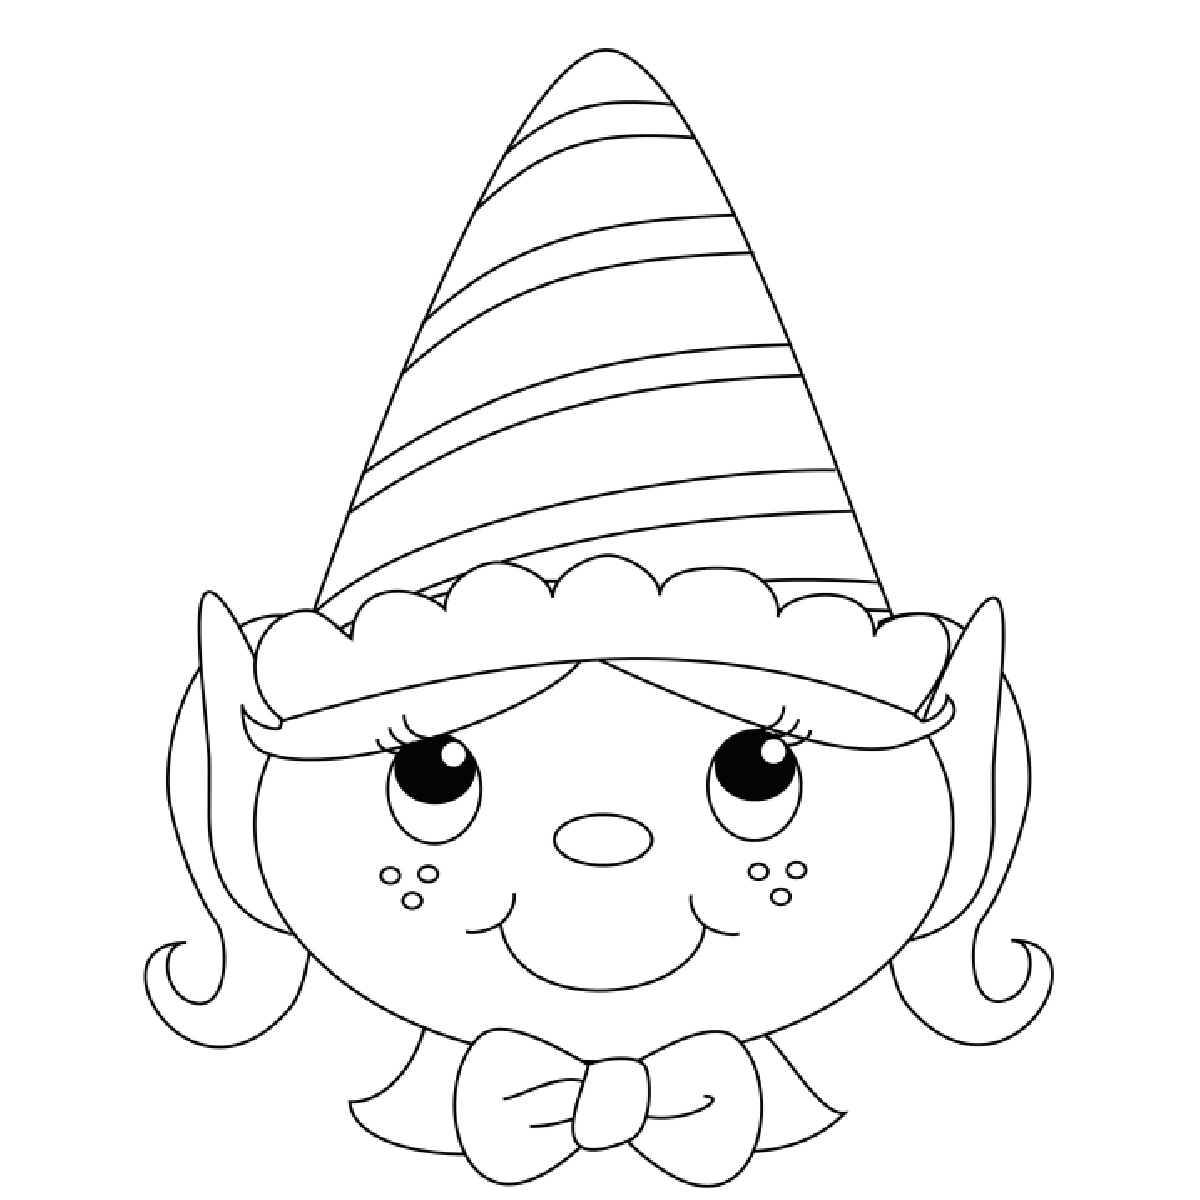 Holiday coloring pages for kids